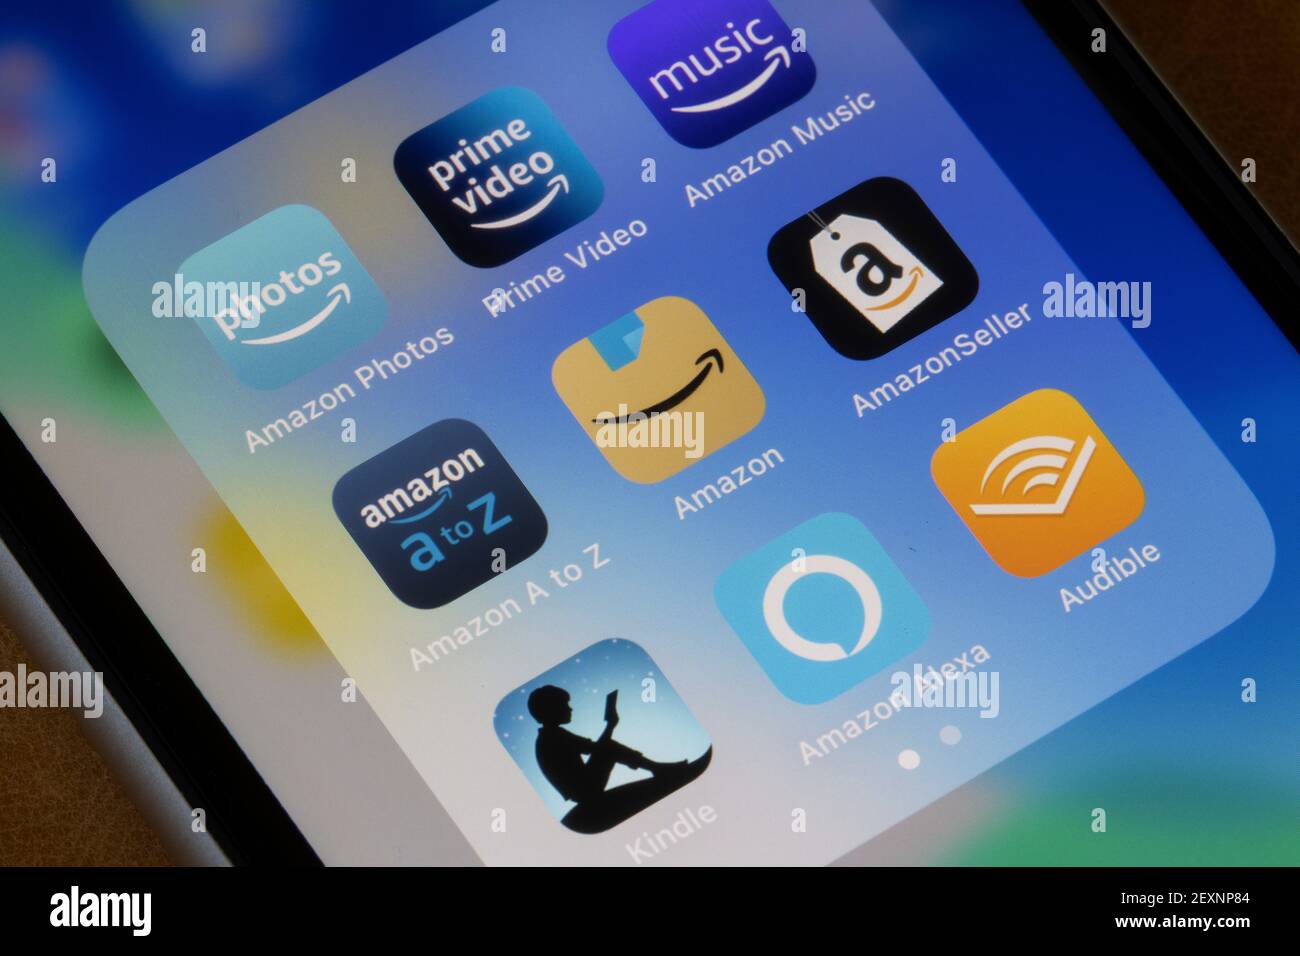 Assorted apps by Amazon are seen on an iPhone - Amazon Photos, Music, Prime Video, A to Z, Amazon Shopping, Amazon Seller, Kindle, Alexa, and Audible. Stock Photo